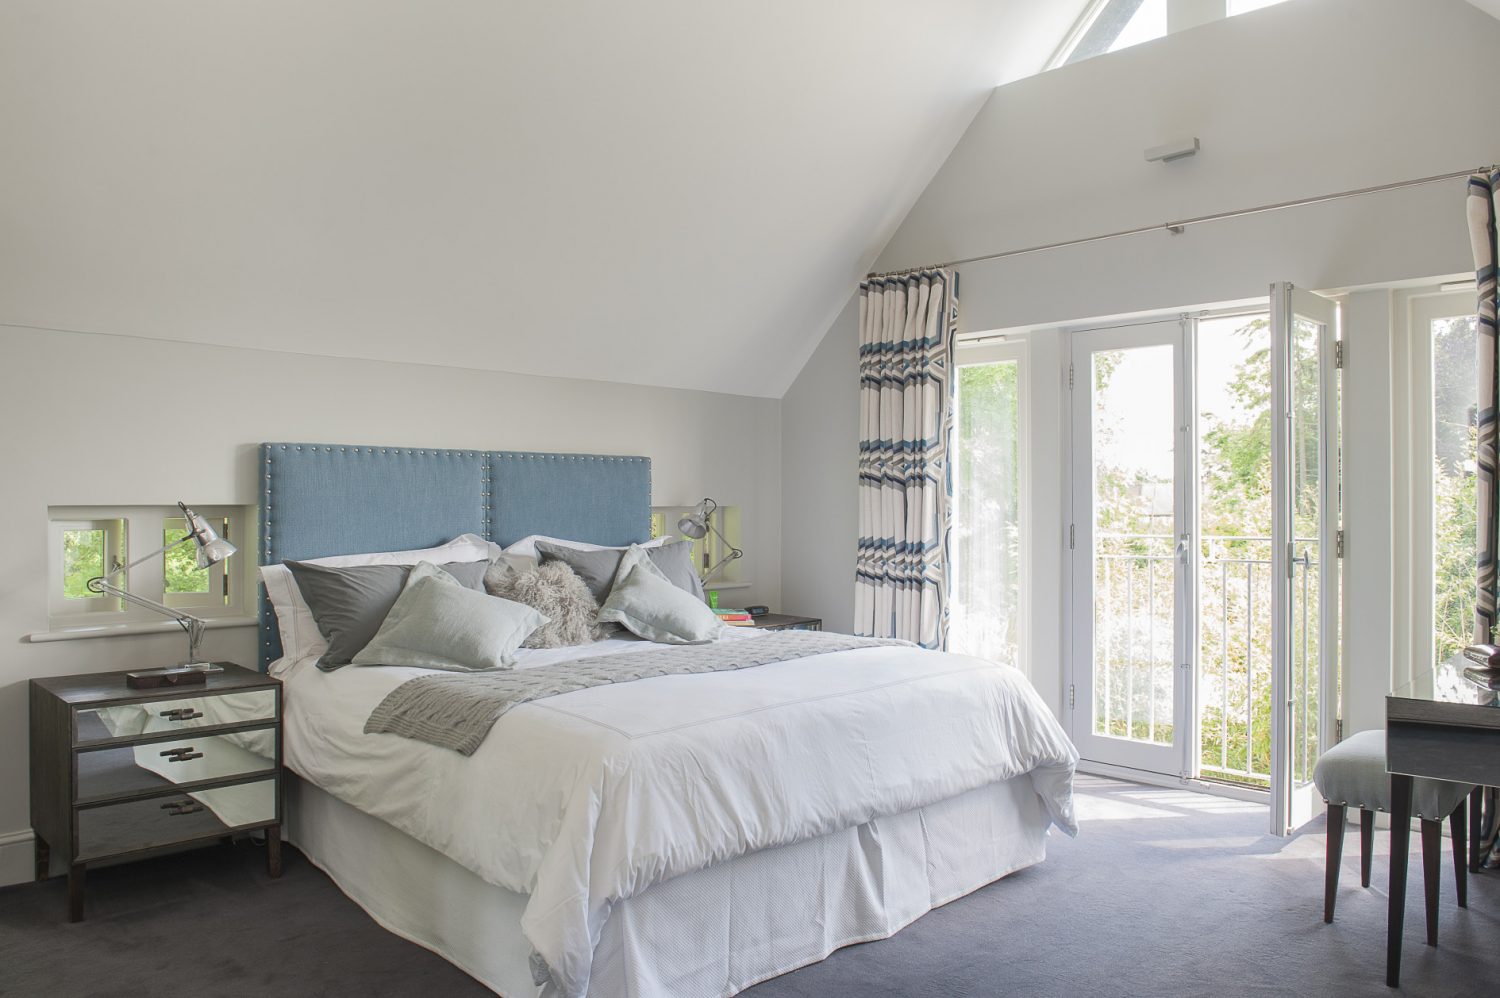 The master bedroom is flooded with light from a vaulted ceiling and French windows onto a Juliet balcony, further enhanced by Jane’s choice of pale grey for the walls, bed linen and the background colour in the Larsen graphic weave fabric of the curtains. The windows on either side of the bed act like extensions of the upholstered headboard, with a pleasing symmetrical effect. The mirrored side tables, specially designed by Nathan for this room, further bounce the light around, as do the chrome bedside lamps which are original vintage Anglepoise